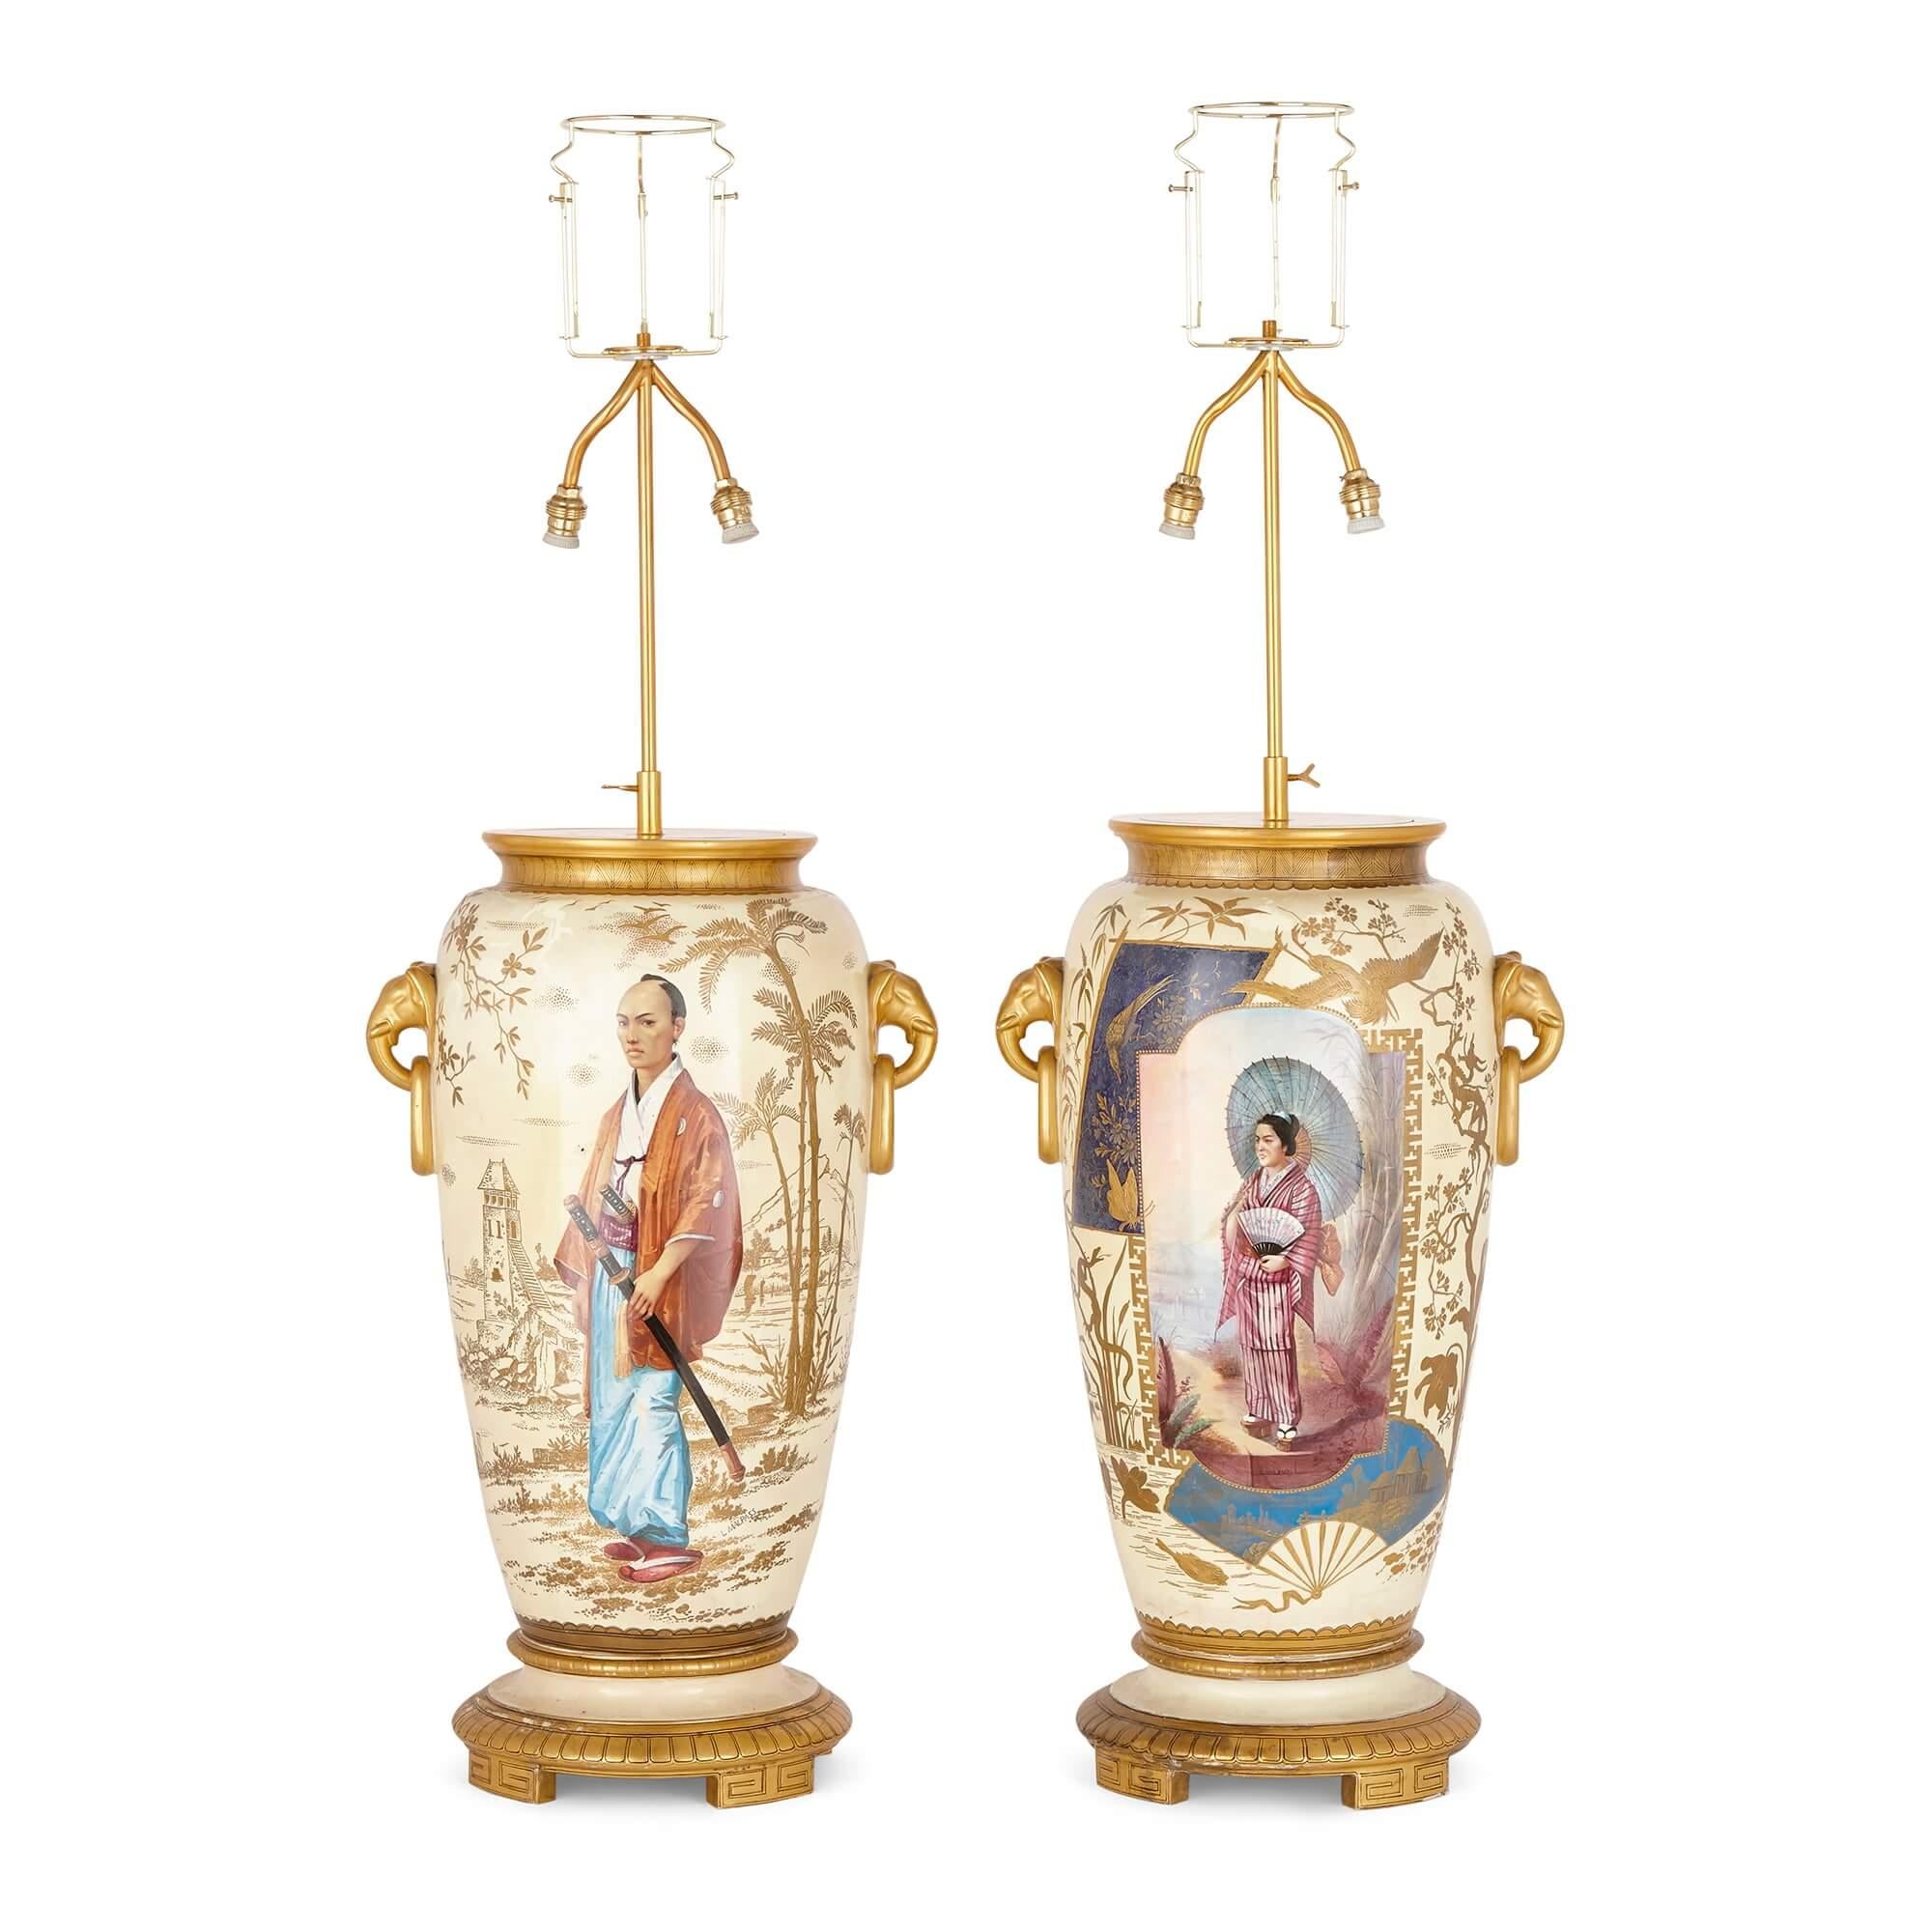 Pair of French Antique Japonisme Glazed Ceramic and Ormolu Mounted Lamps In Excellent Condition For Sale In London, GB